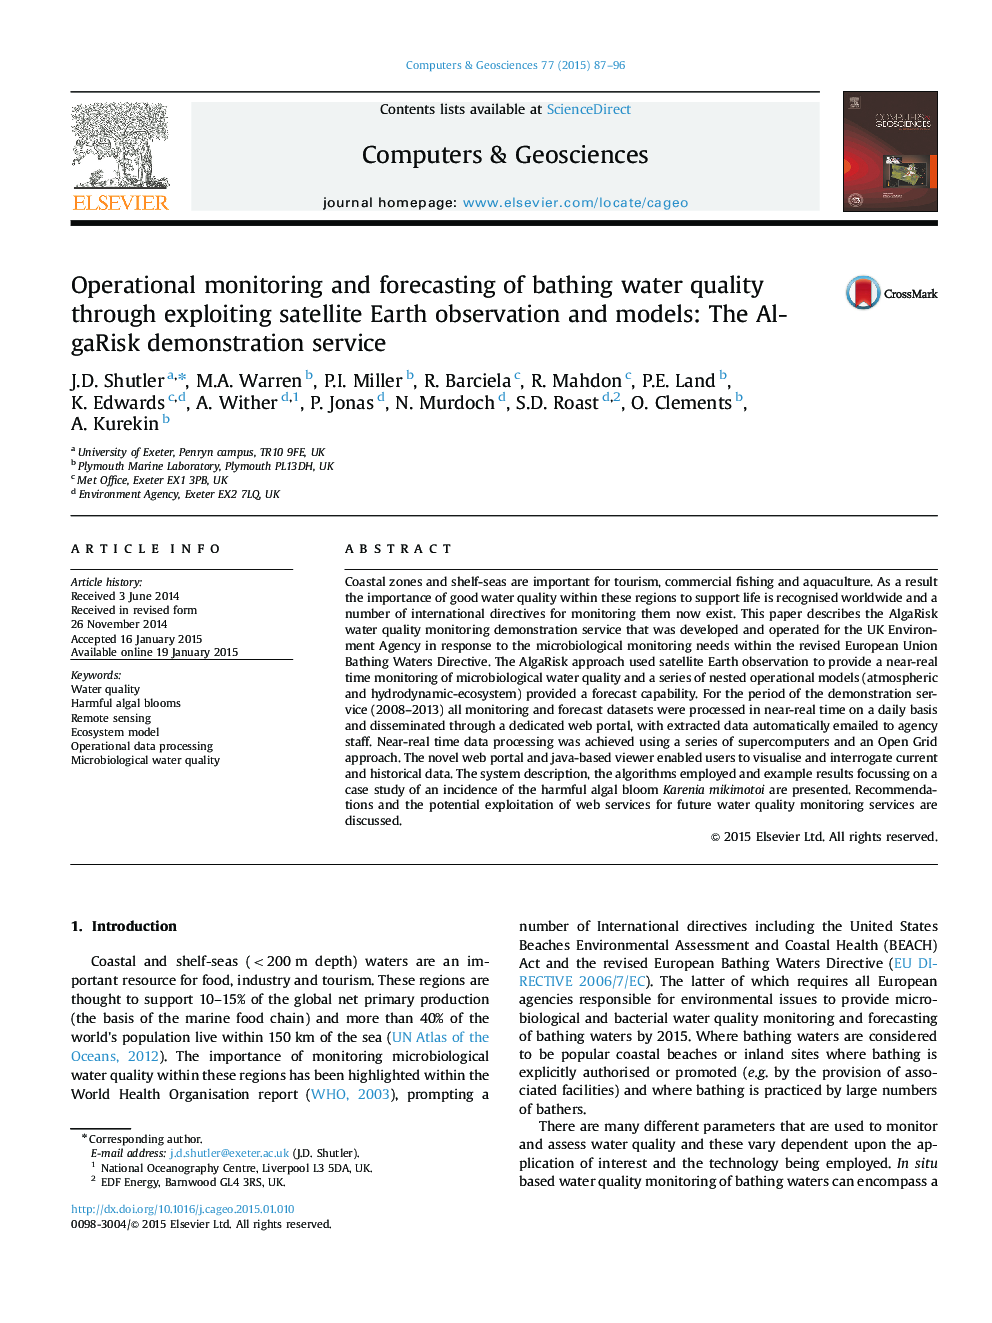 Operational monitoring and forecasting of bathing water quality through exploiting satellite Earth observation and models: The AlgaRisk demonstration service